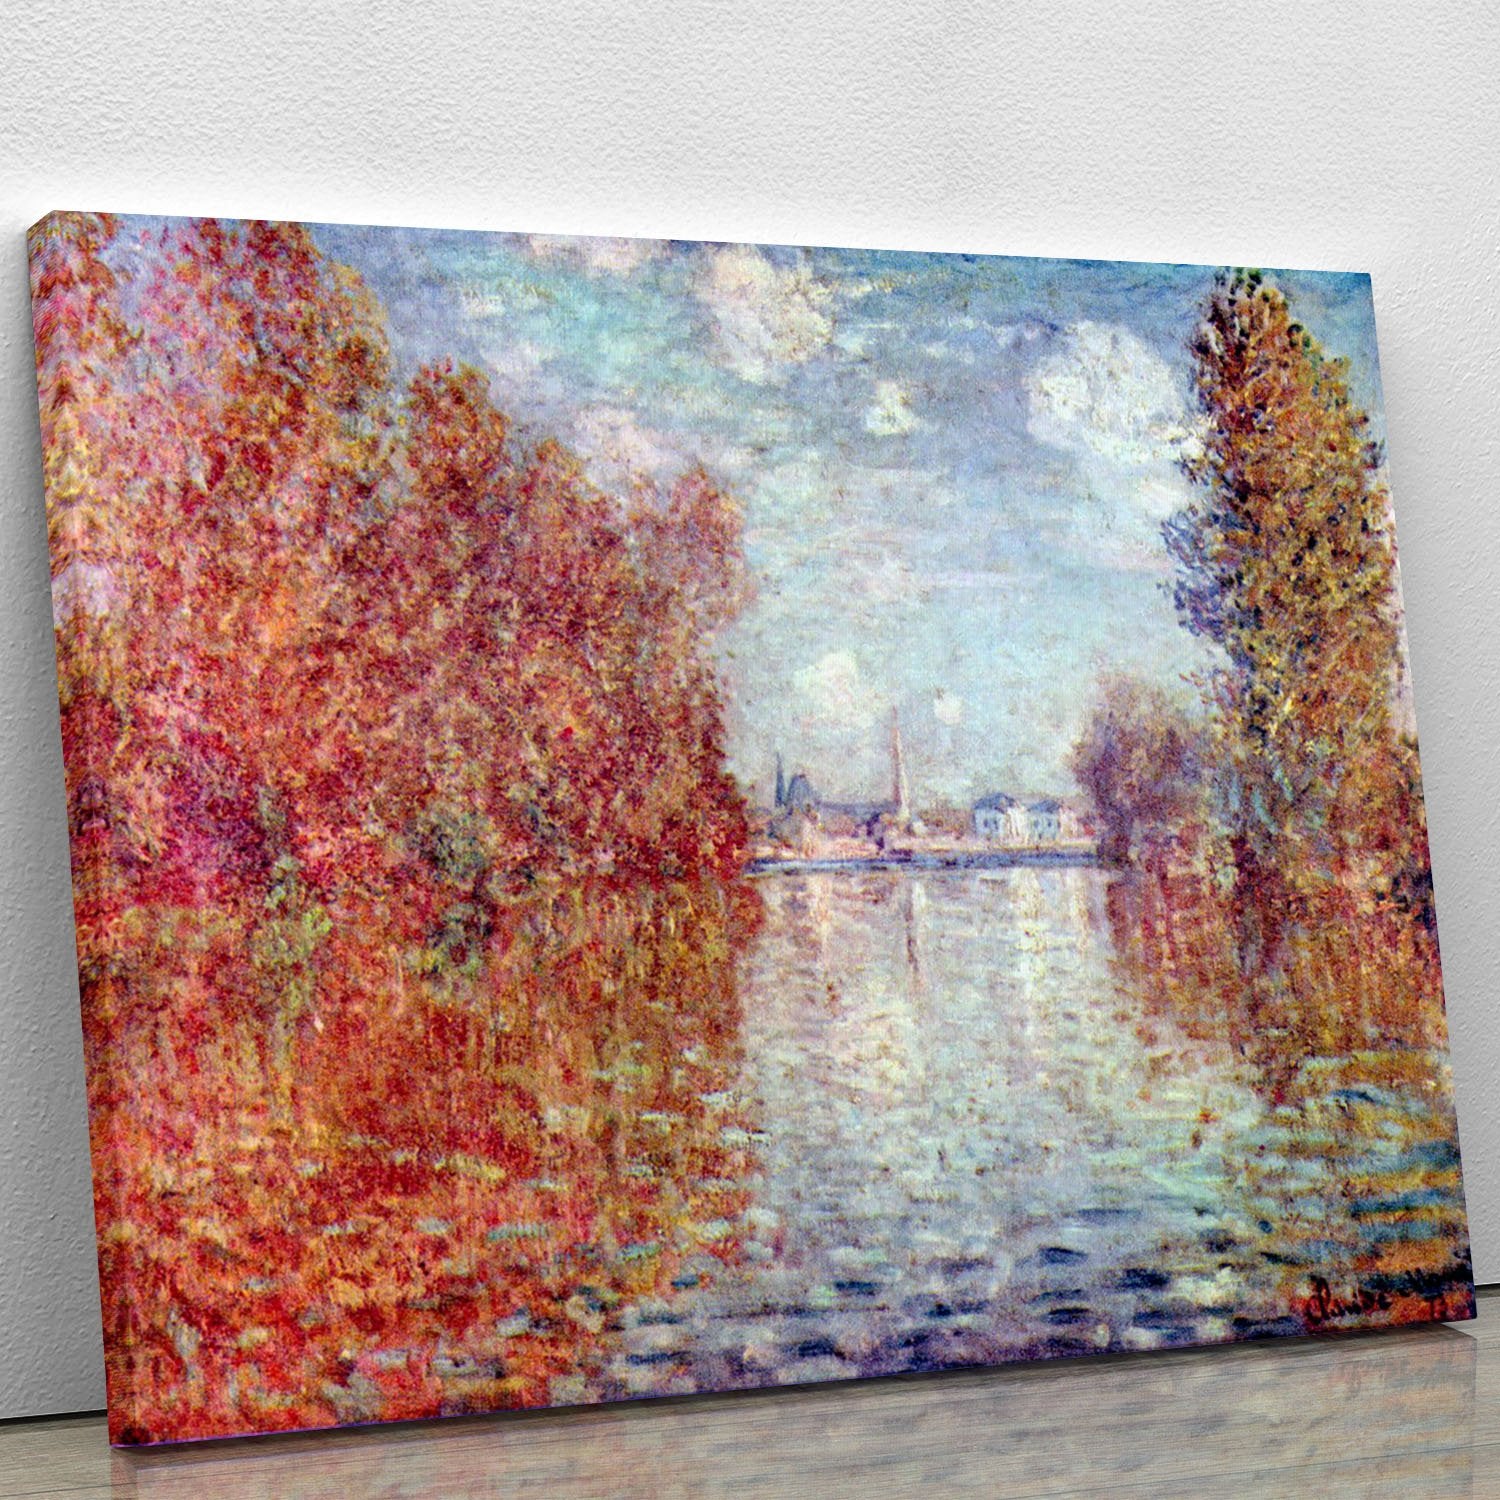 Autumn in Argenteuil by Monet Canvas Print or Poster